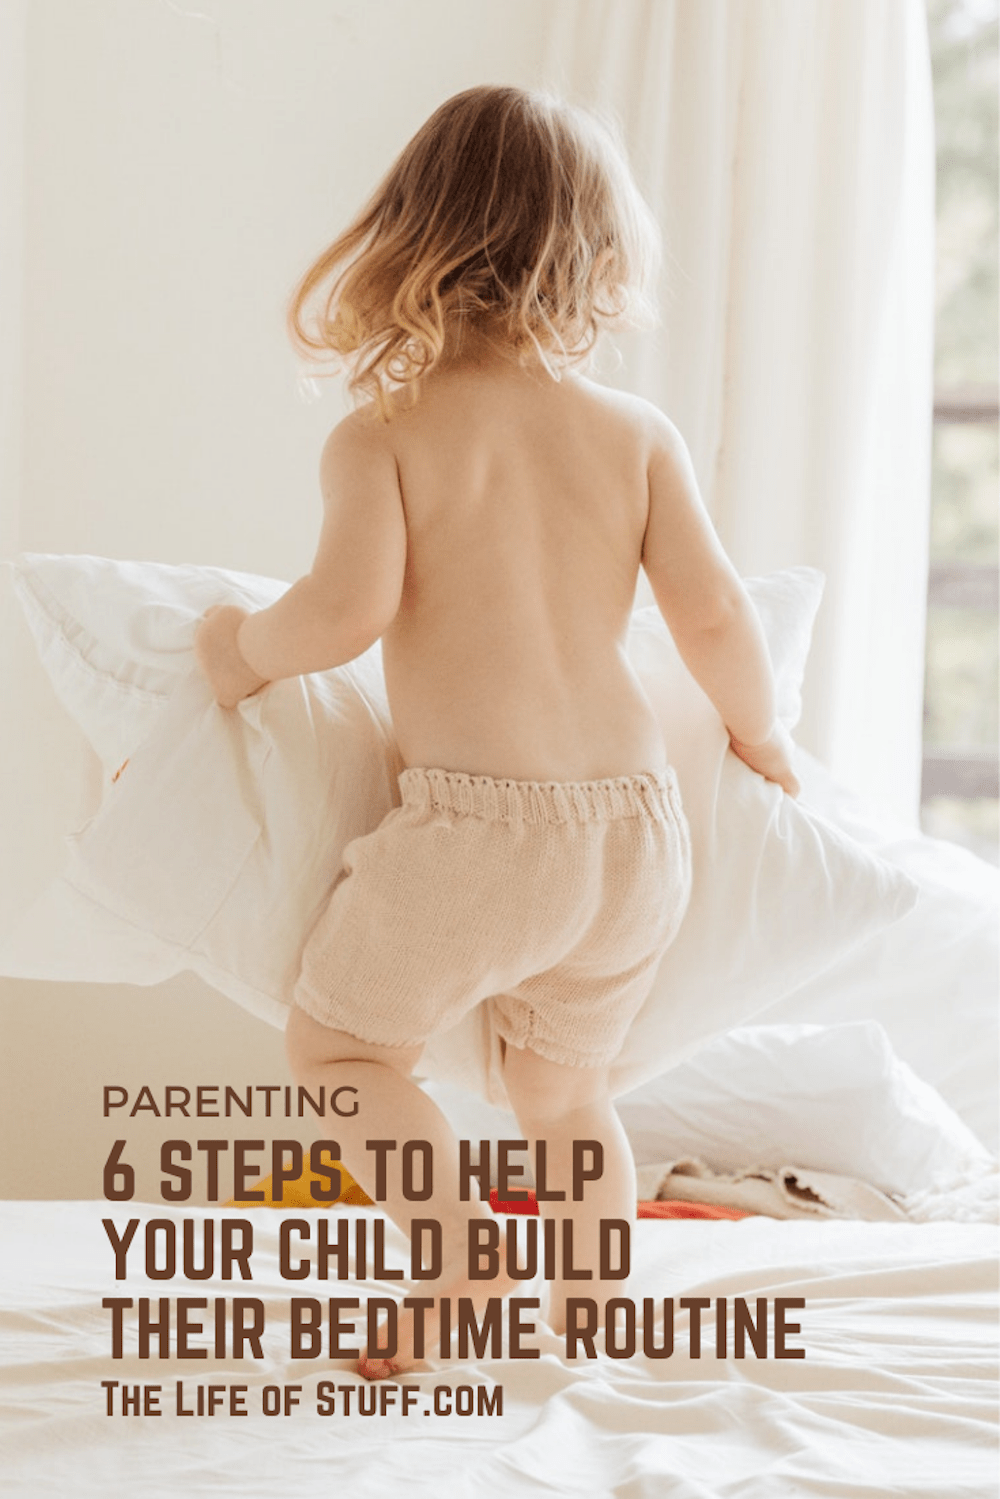 6 Steps to Help your Child Build their Bedtime Routine - The Life of Stuff